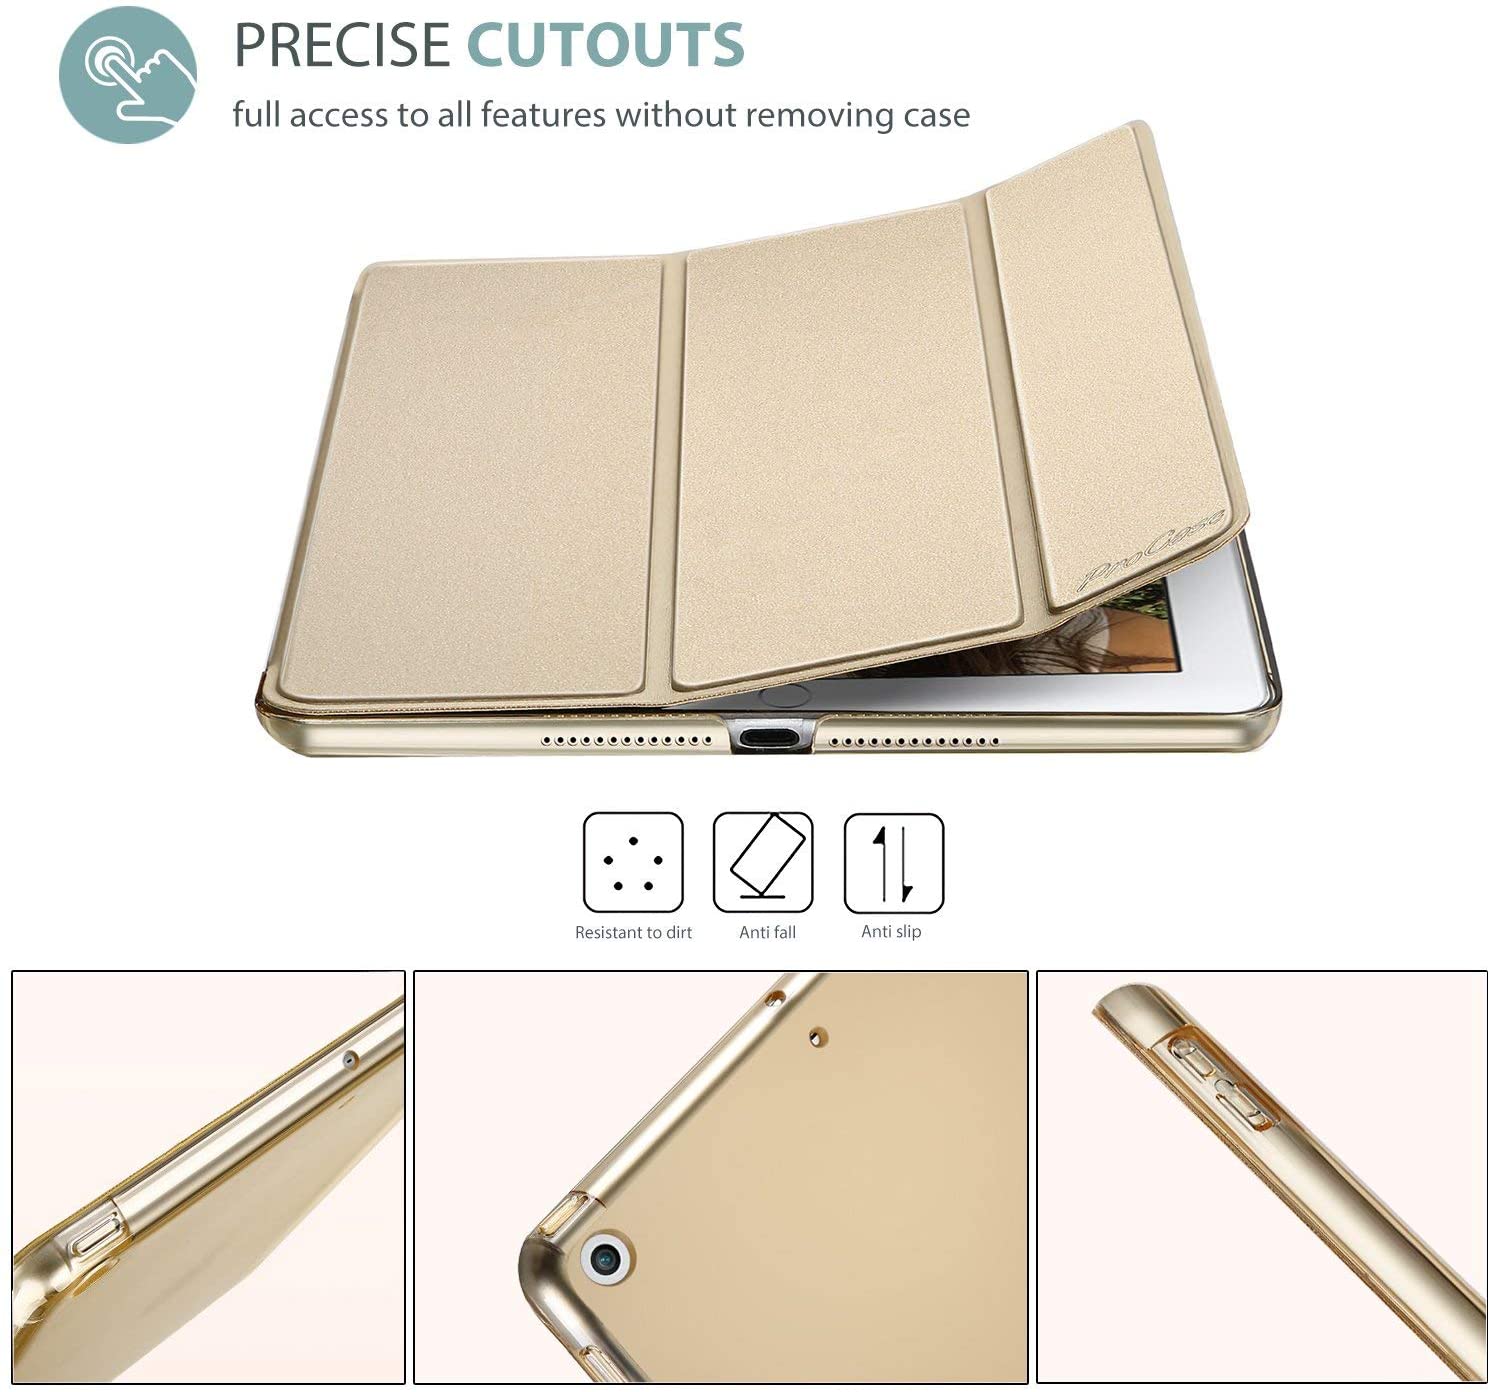 ProCase Smart Case for iPad 2 Edition -  Navy Blue & Gold. - e4cents